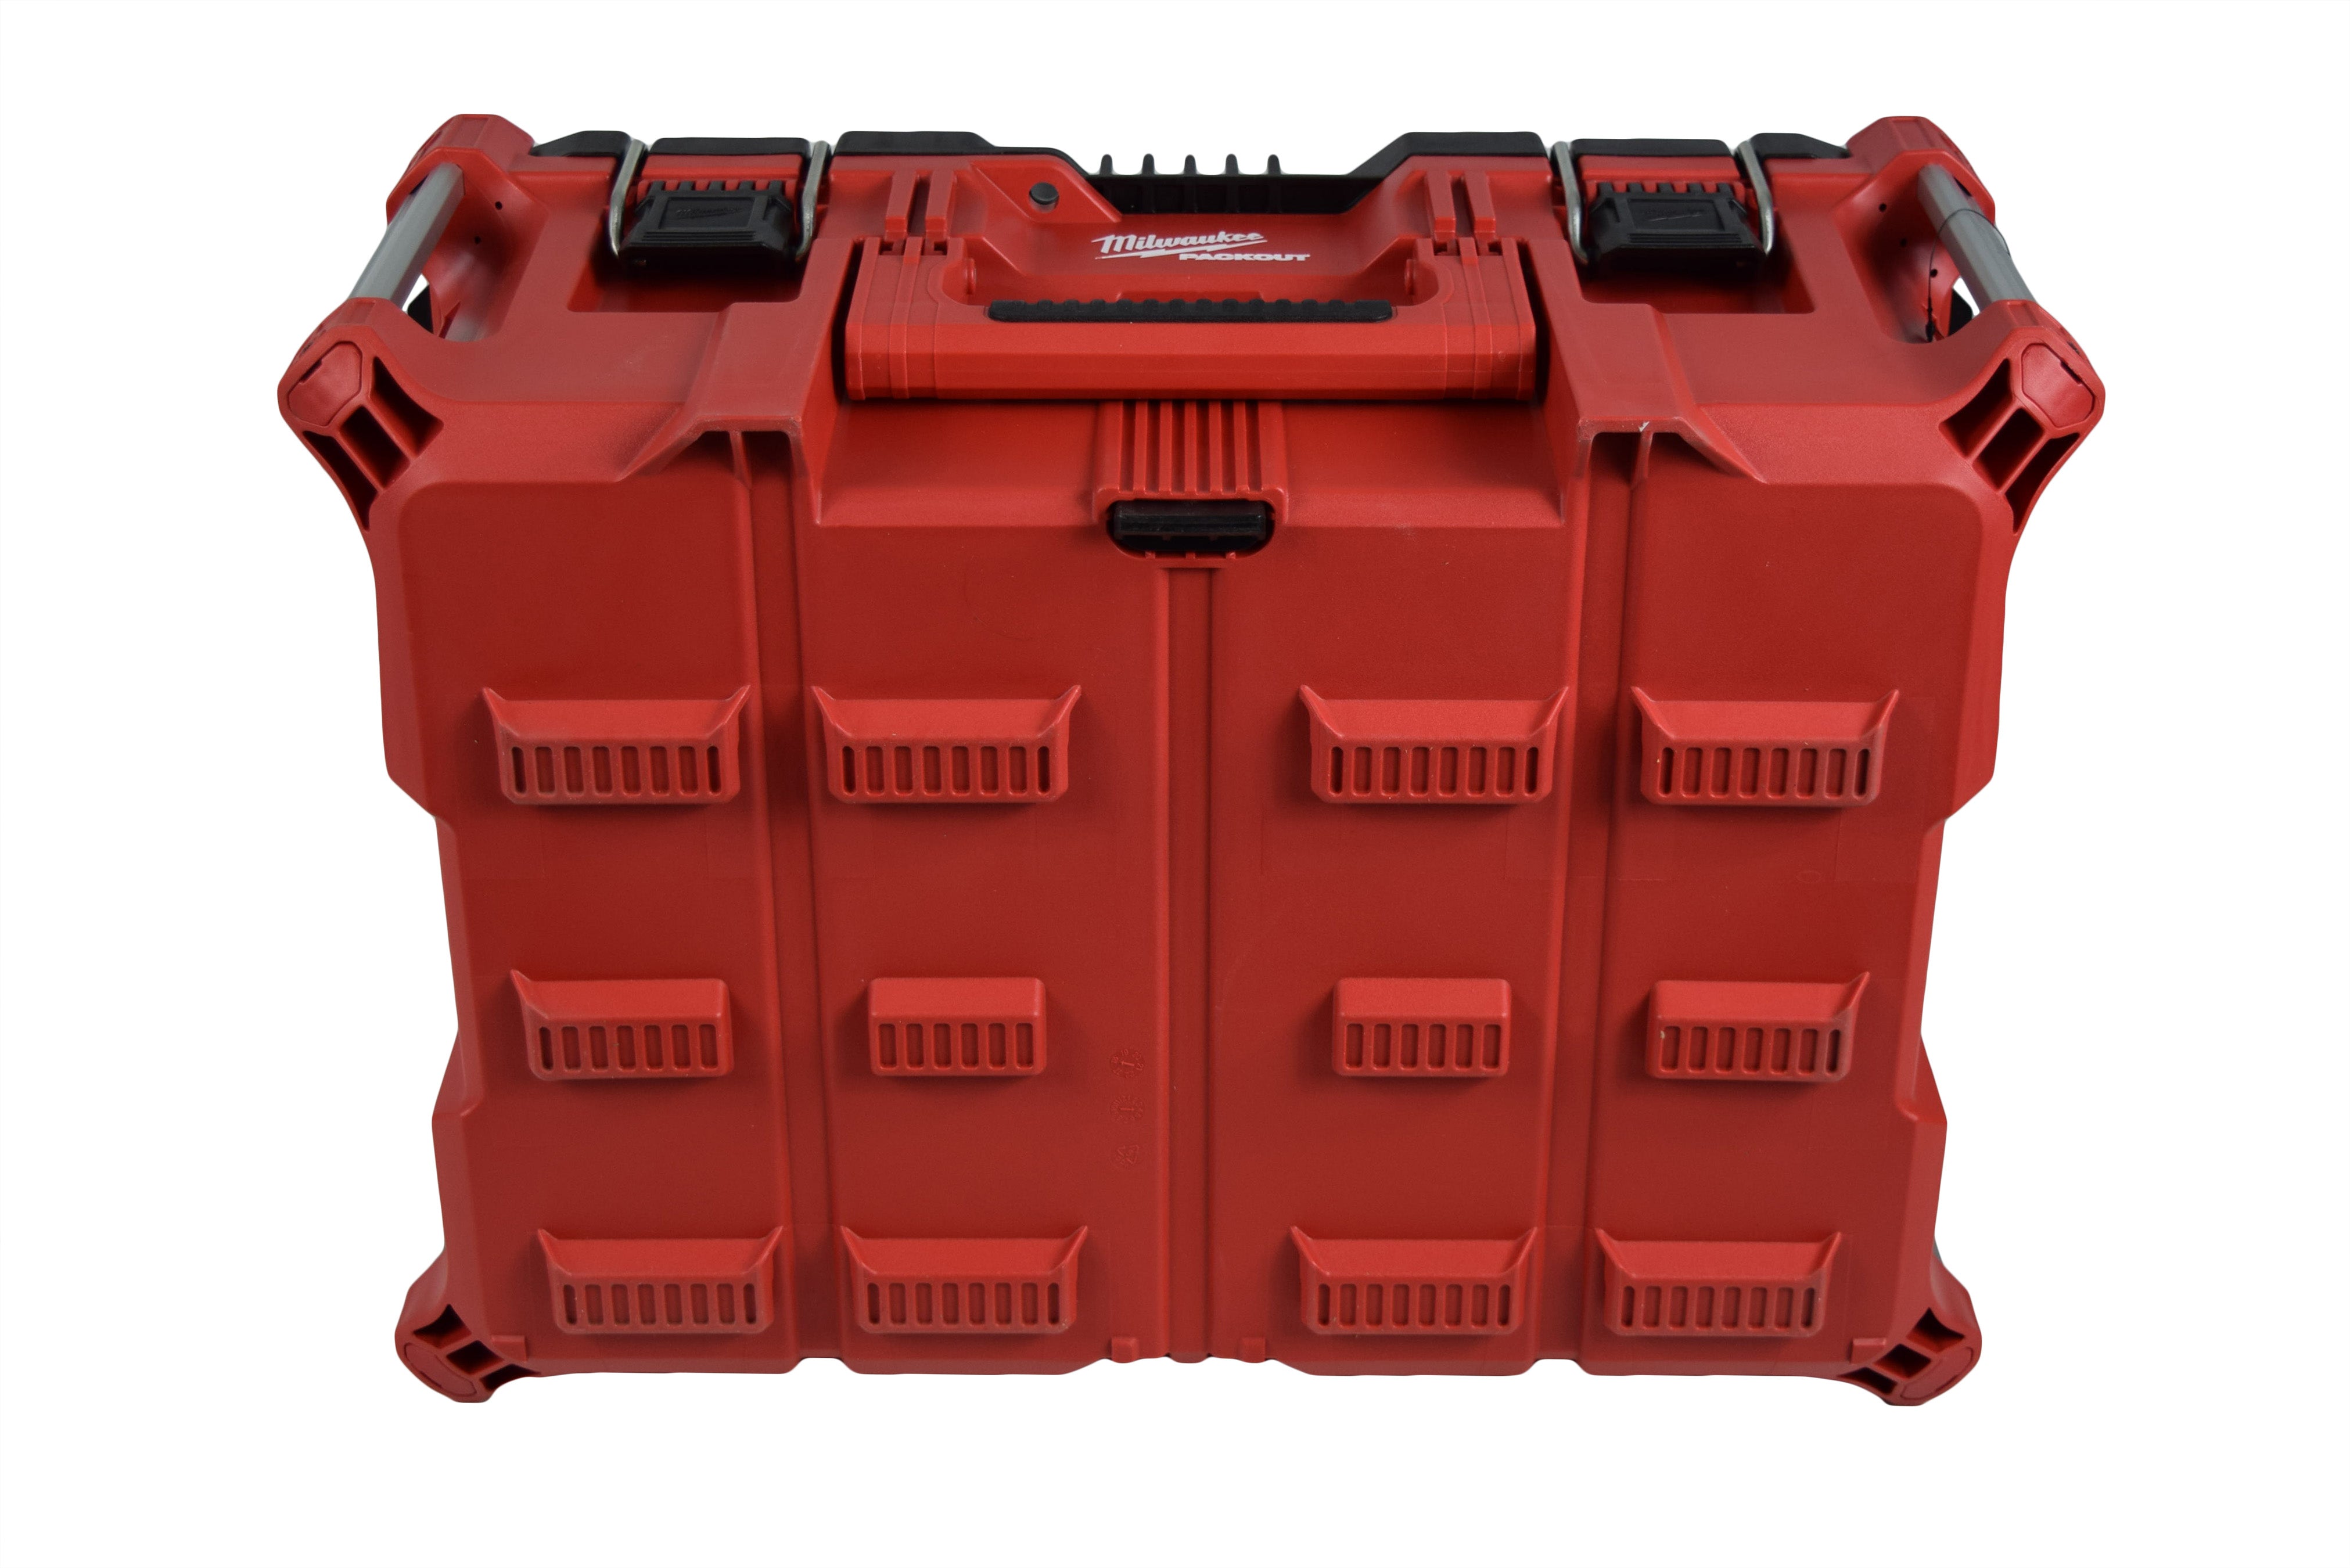 Milwaukee 48-22-8425 Packout 22.1" x 16.1" Heavy Duty Red/Black Large Tool Box